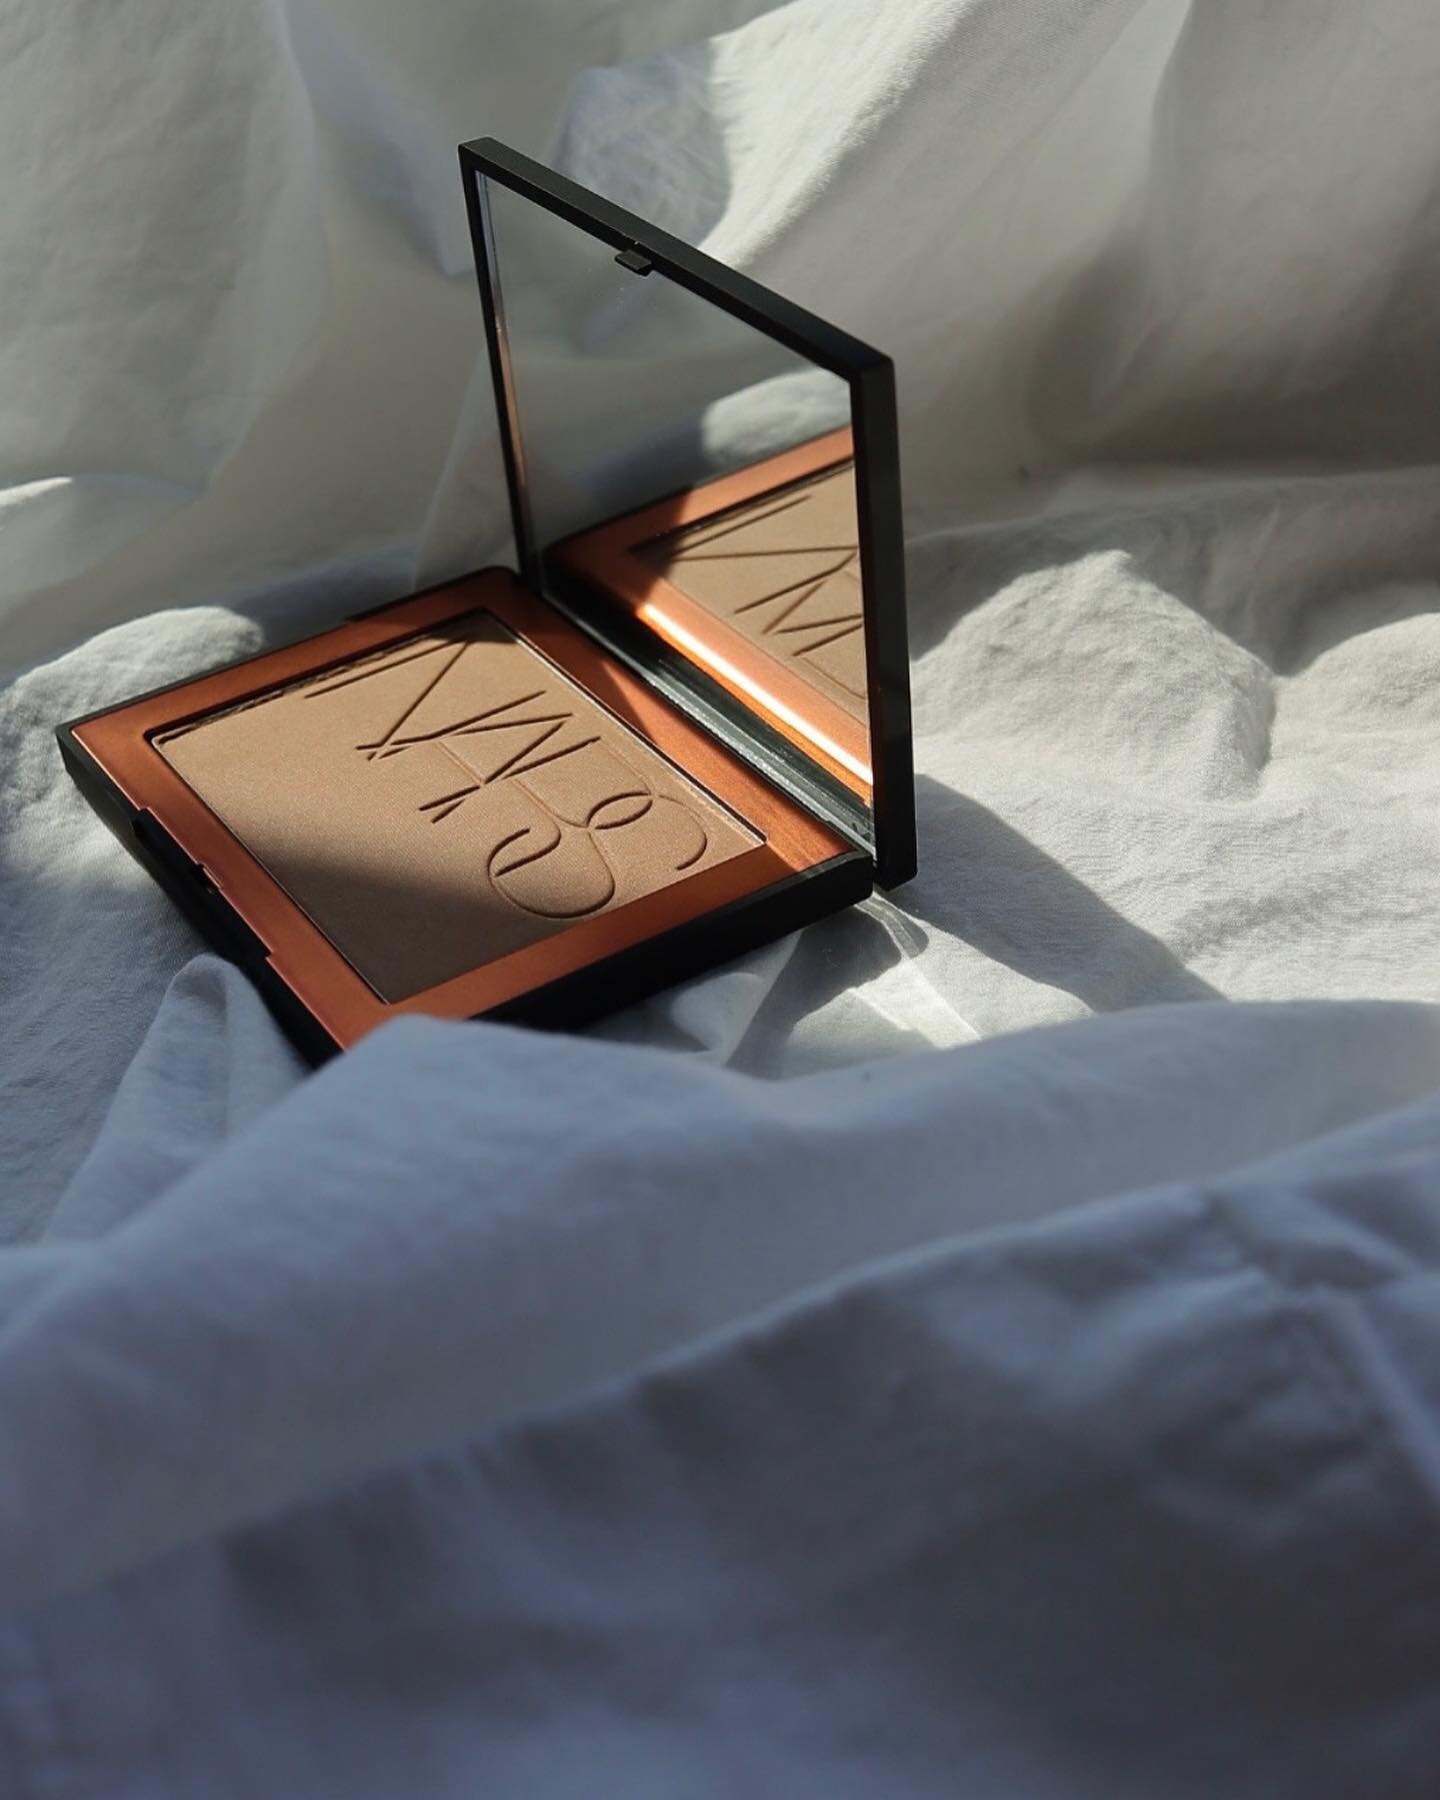 Get ready to turn up the heat with @narsissist ' The Laguna Collection. Discover the beauty of bronzing and embrace the sultry, sunkissed, and sensational look this season.
⠀⠀⠀⠀⠀⠀⠀⠀⠀
Whether you're looking to enhance your natural beauty or want to cr